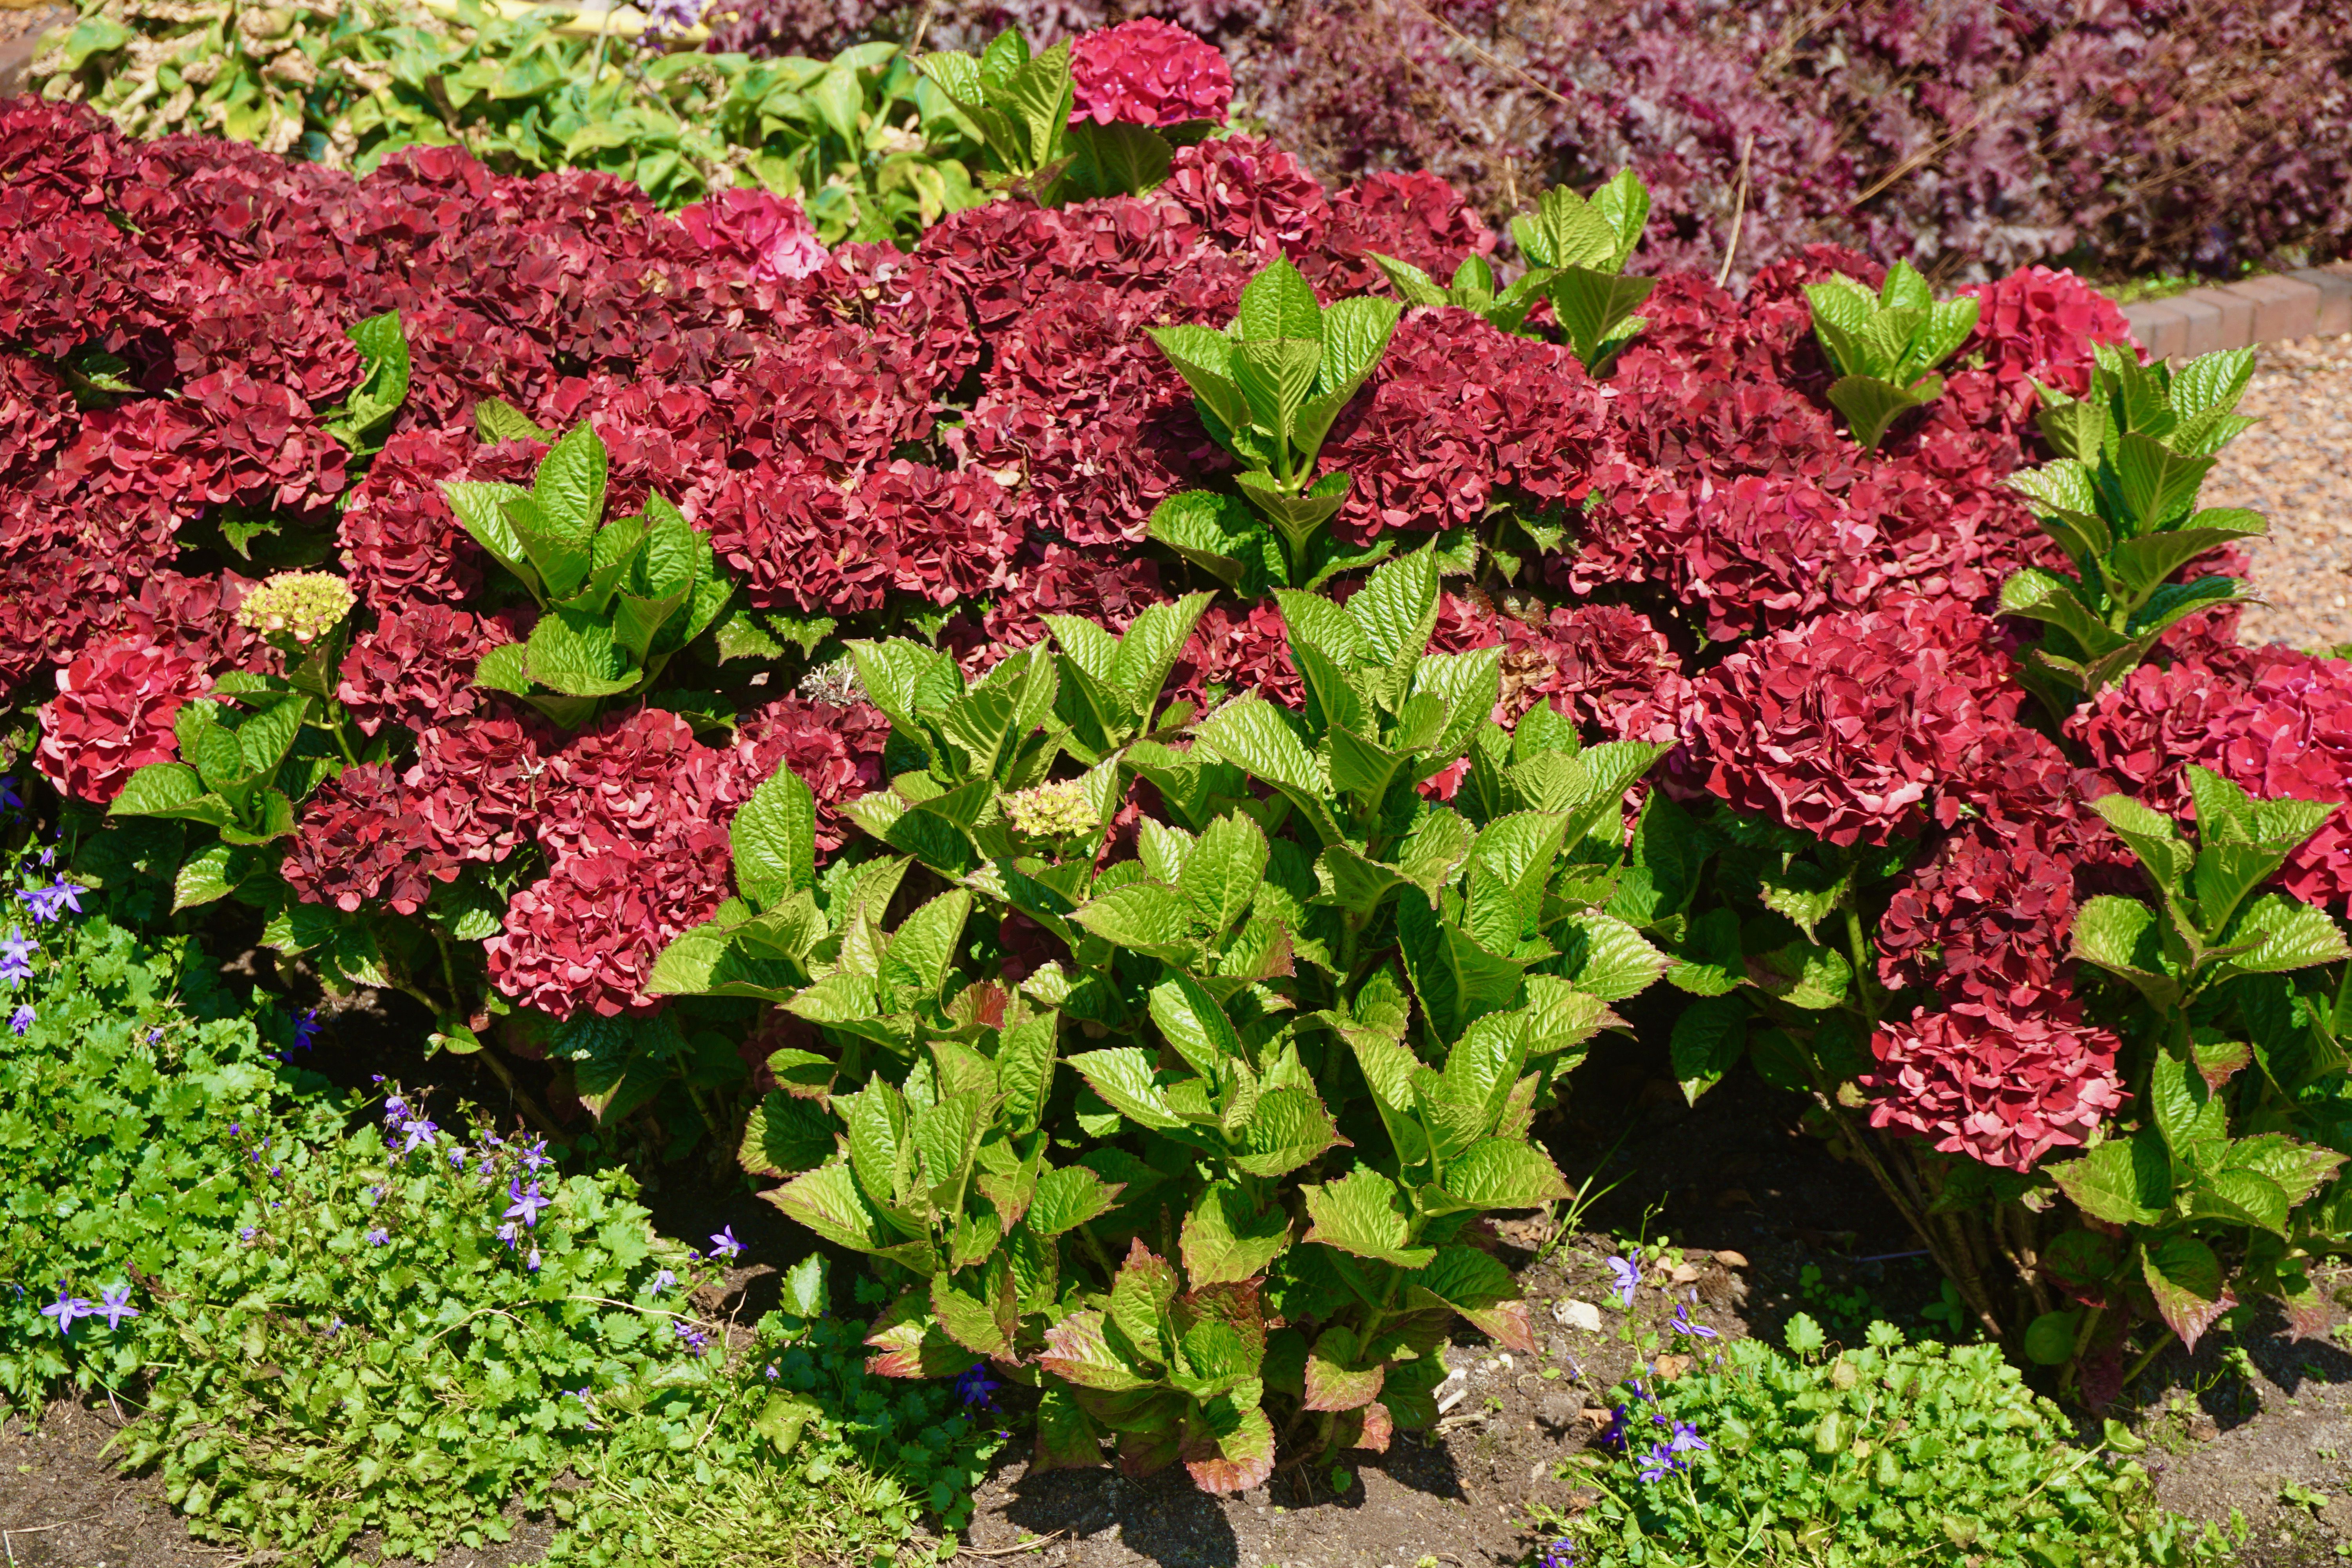 images/plants/hydrangea/hyd-magical-everlasting-crimson/hyd-magical-everlasting-crimson-0002.jpg